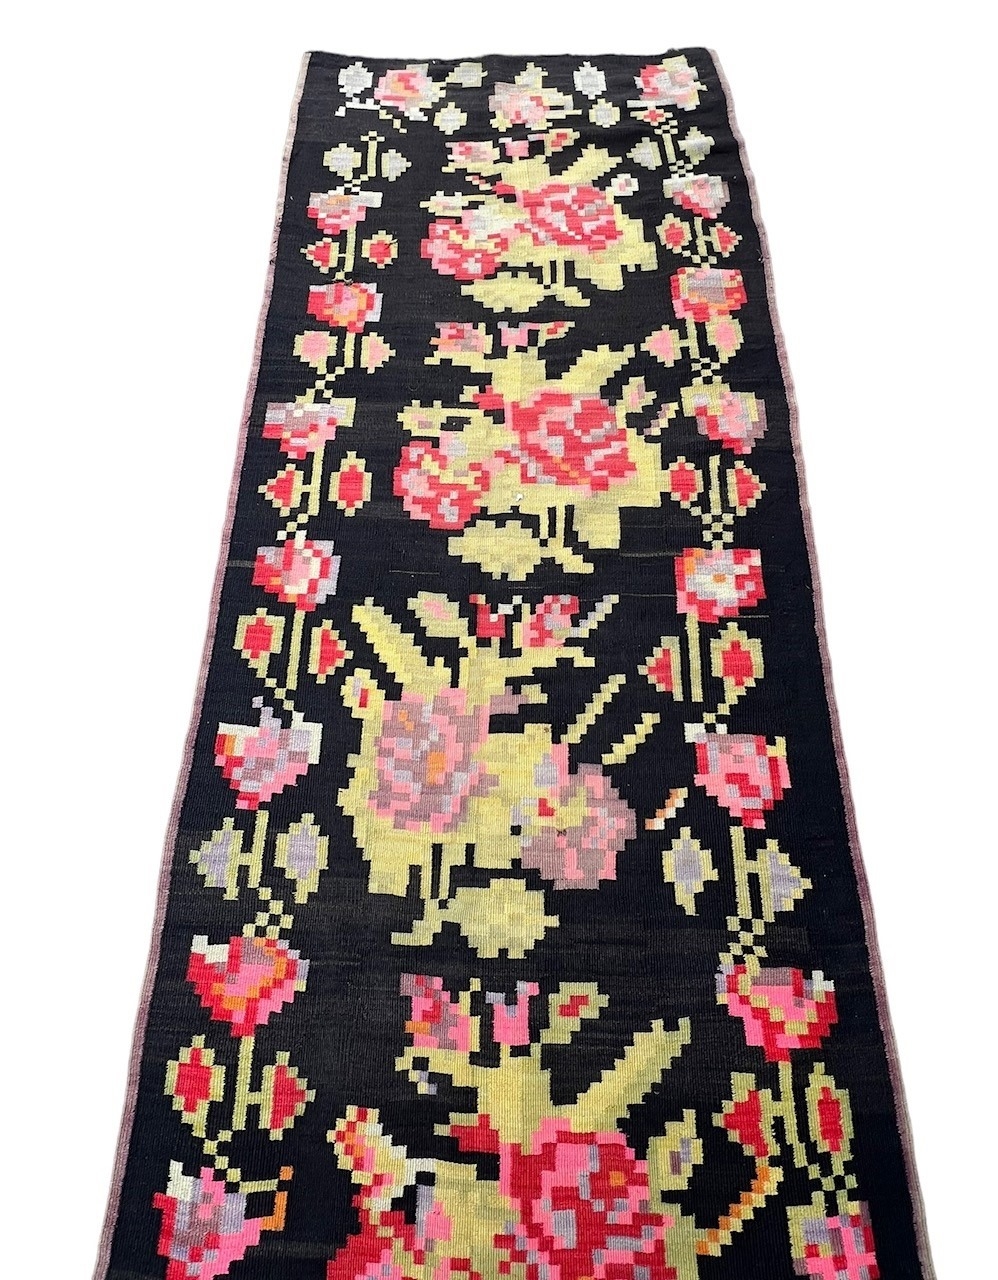 BESSARABIAN CIRCA 1880, ALL WOOL CARPET RUNNER with floral decoration. (378 x 107cm) - Image 3 of 4